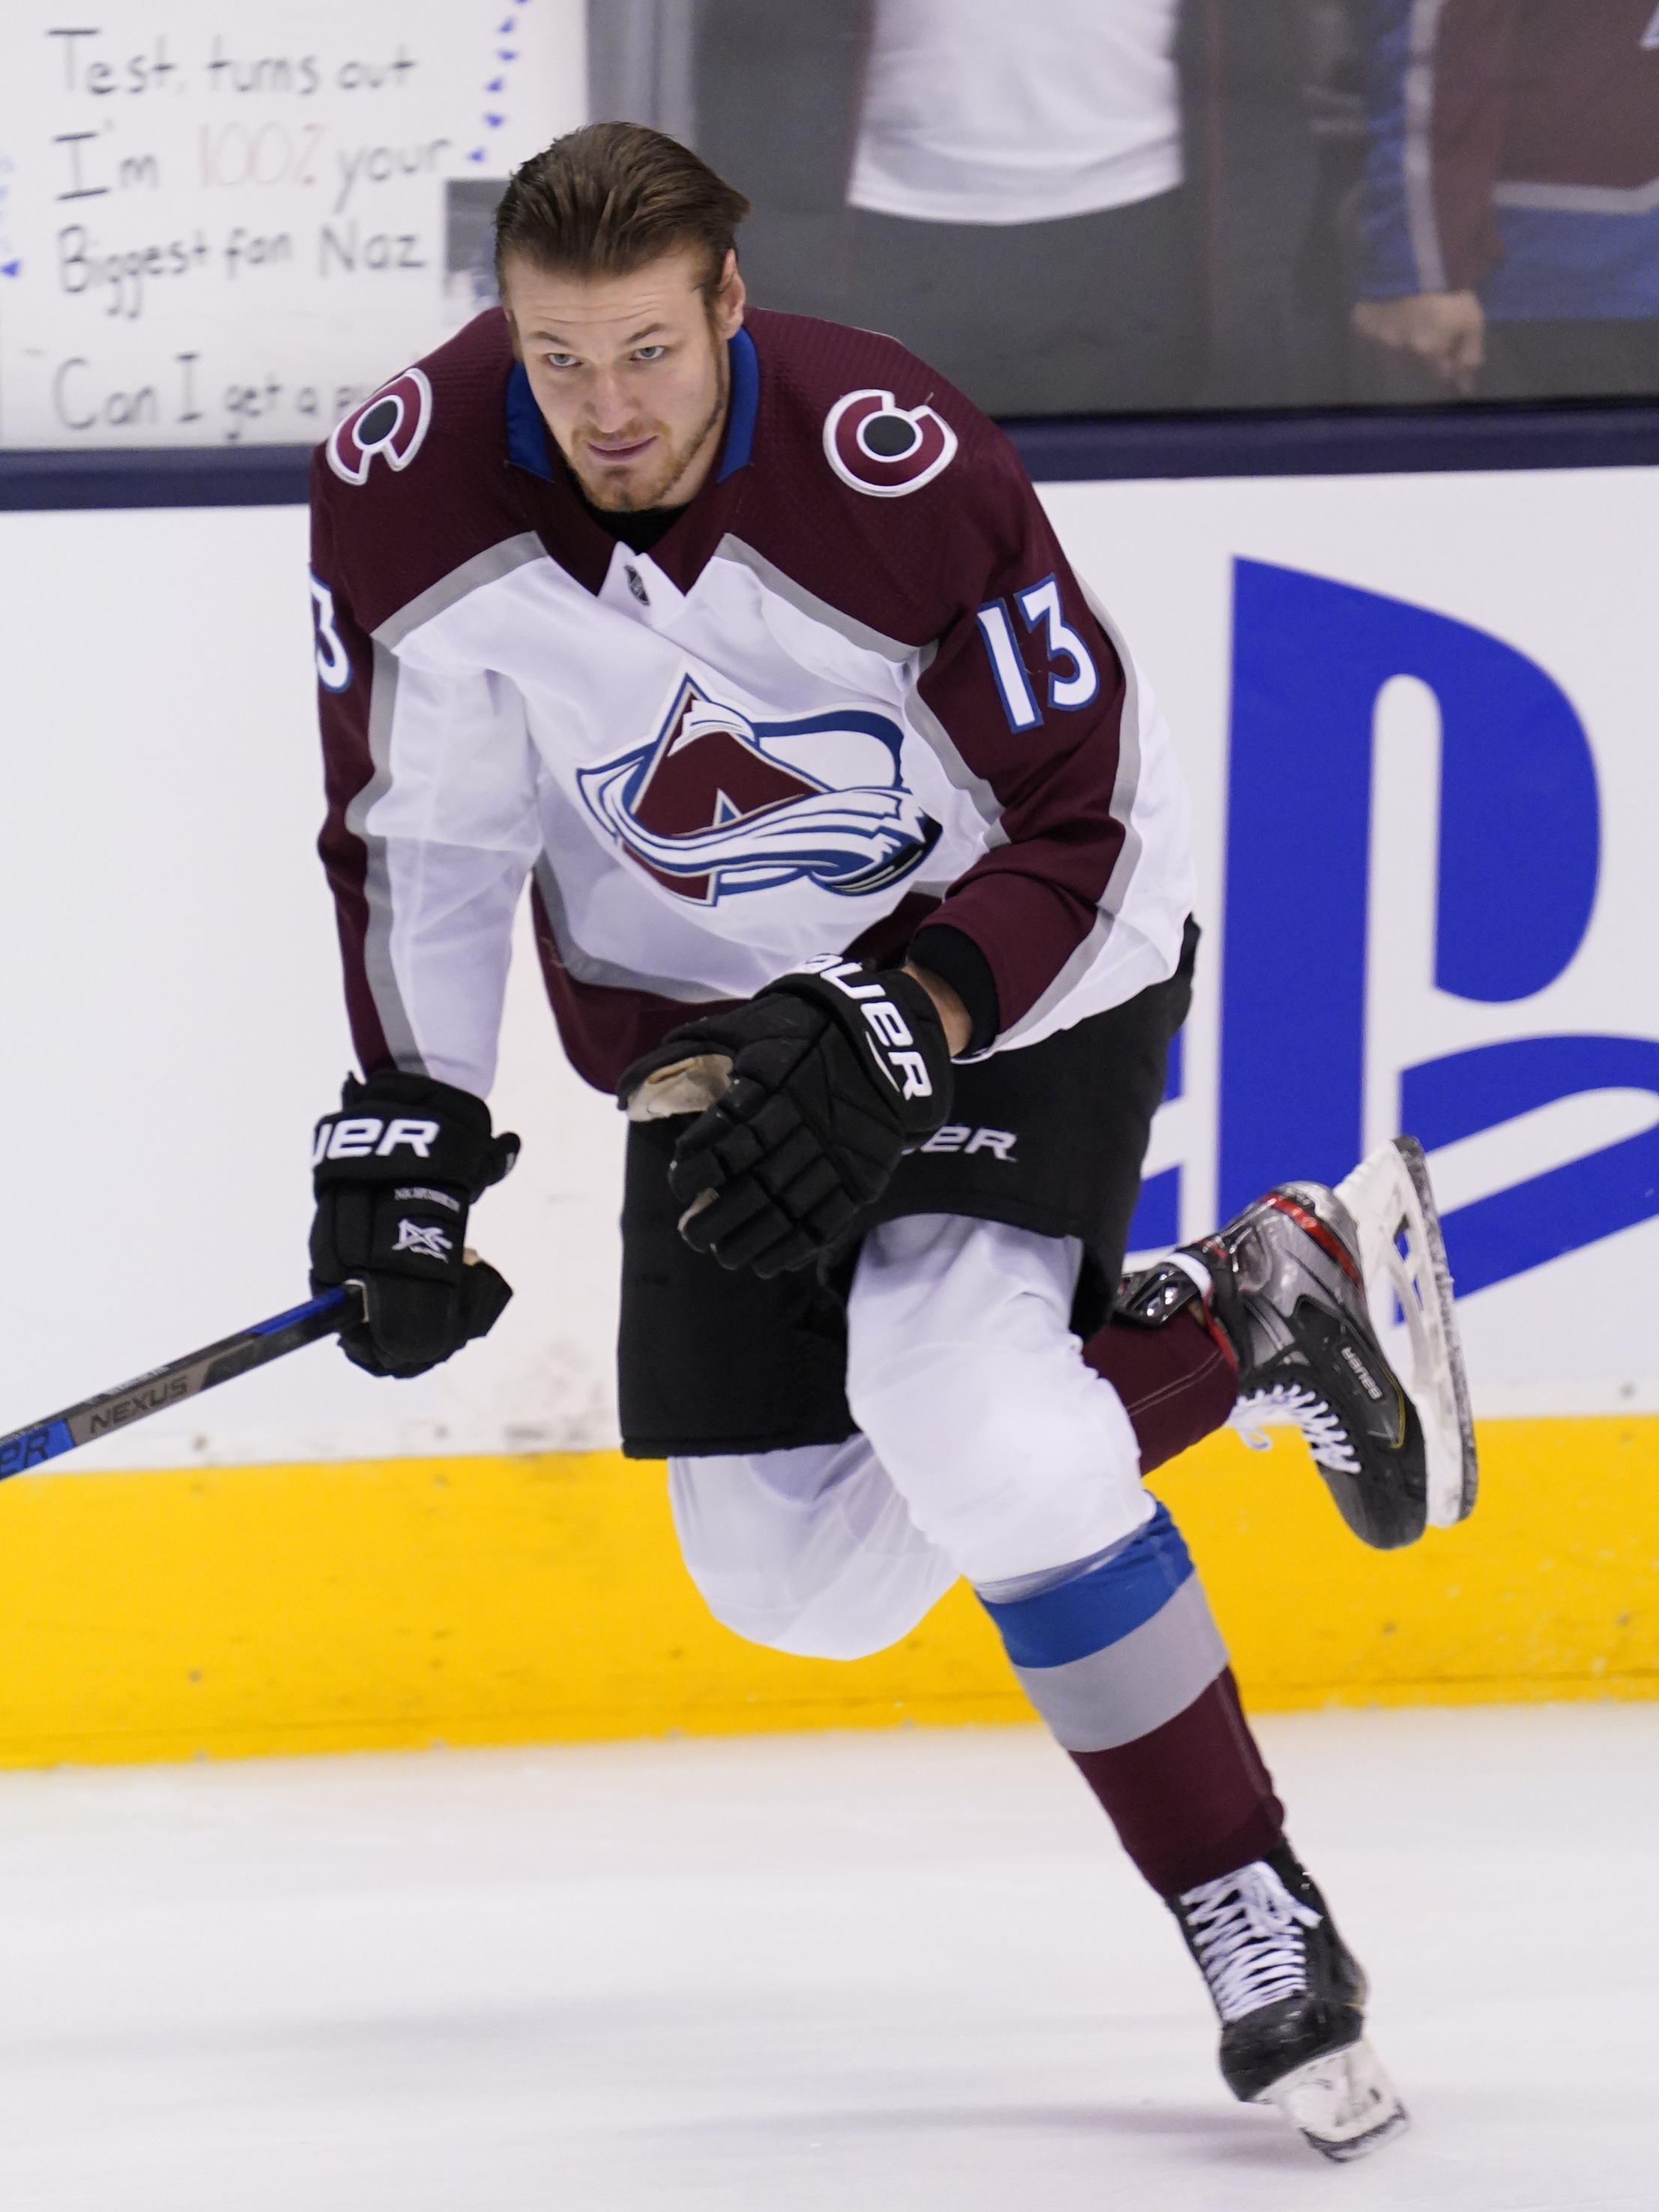 Tyson Jost Re-Signs with Colorado Avalanche - Last Word On Hockey